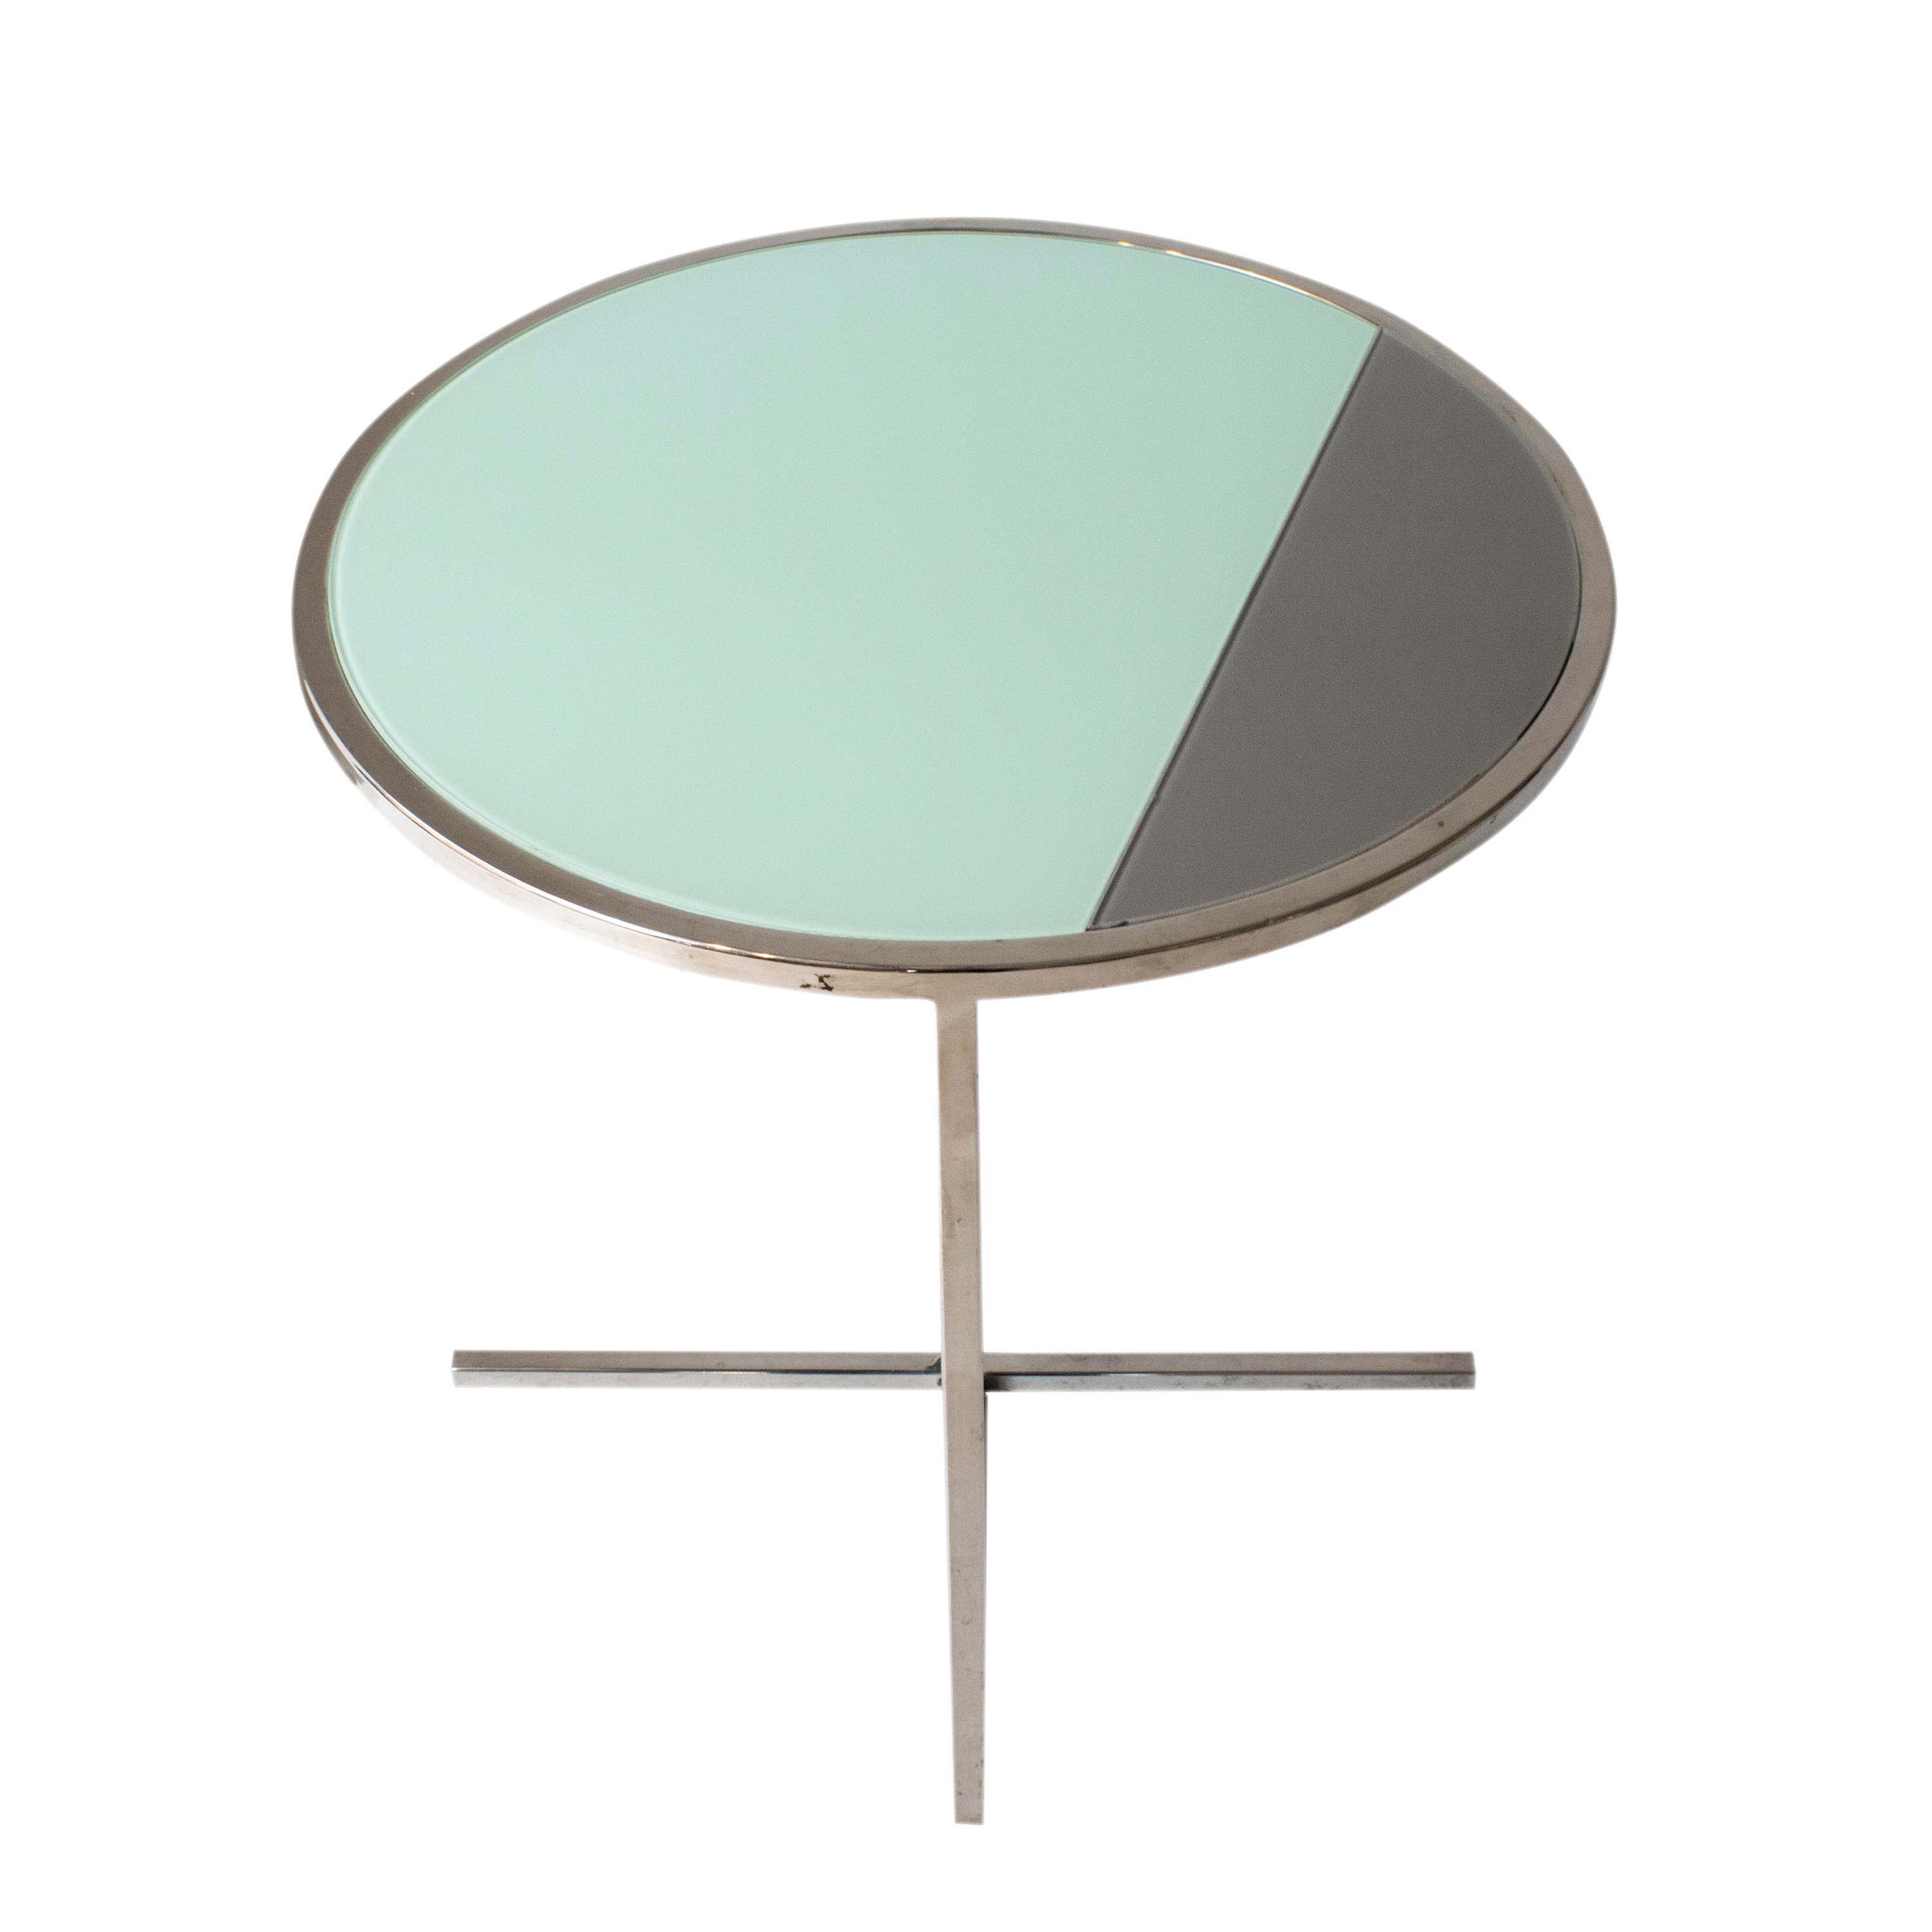 Post-Modern Contemporary Chromed Steel Green and Grey Glass Round Center Table, Italy, 1970